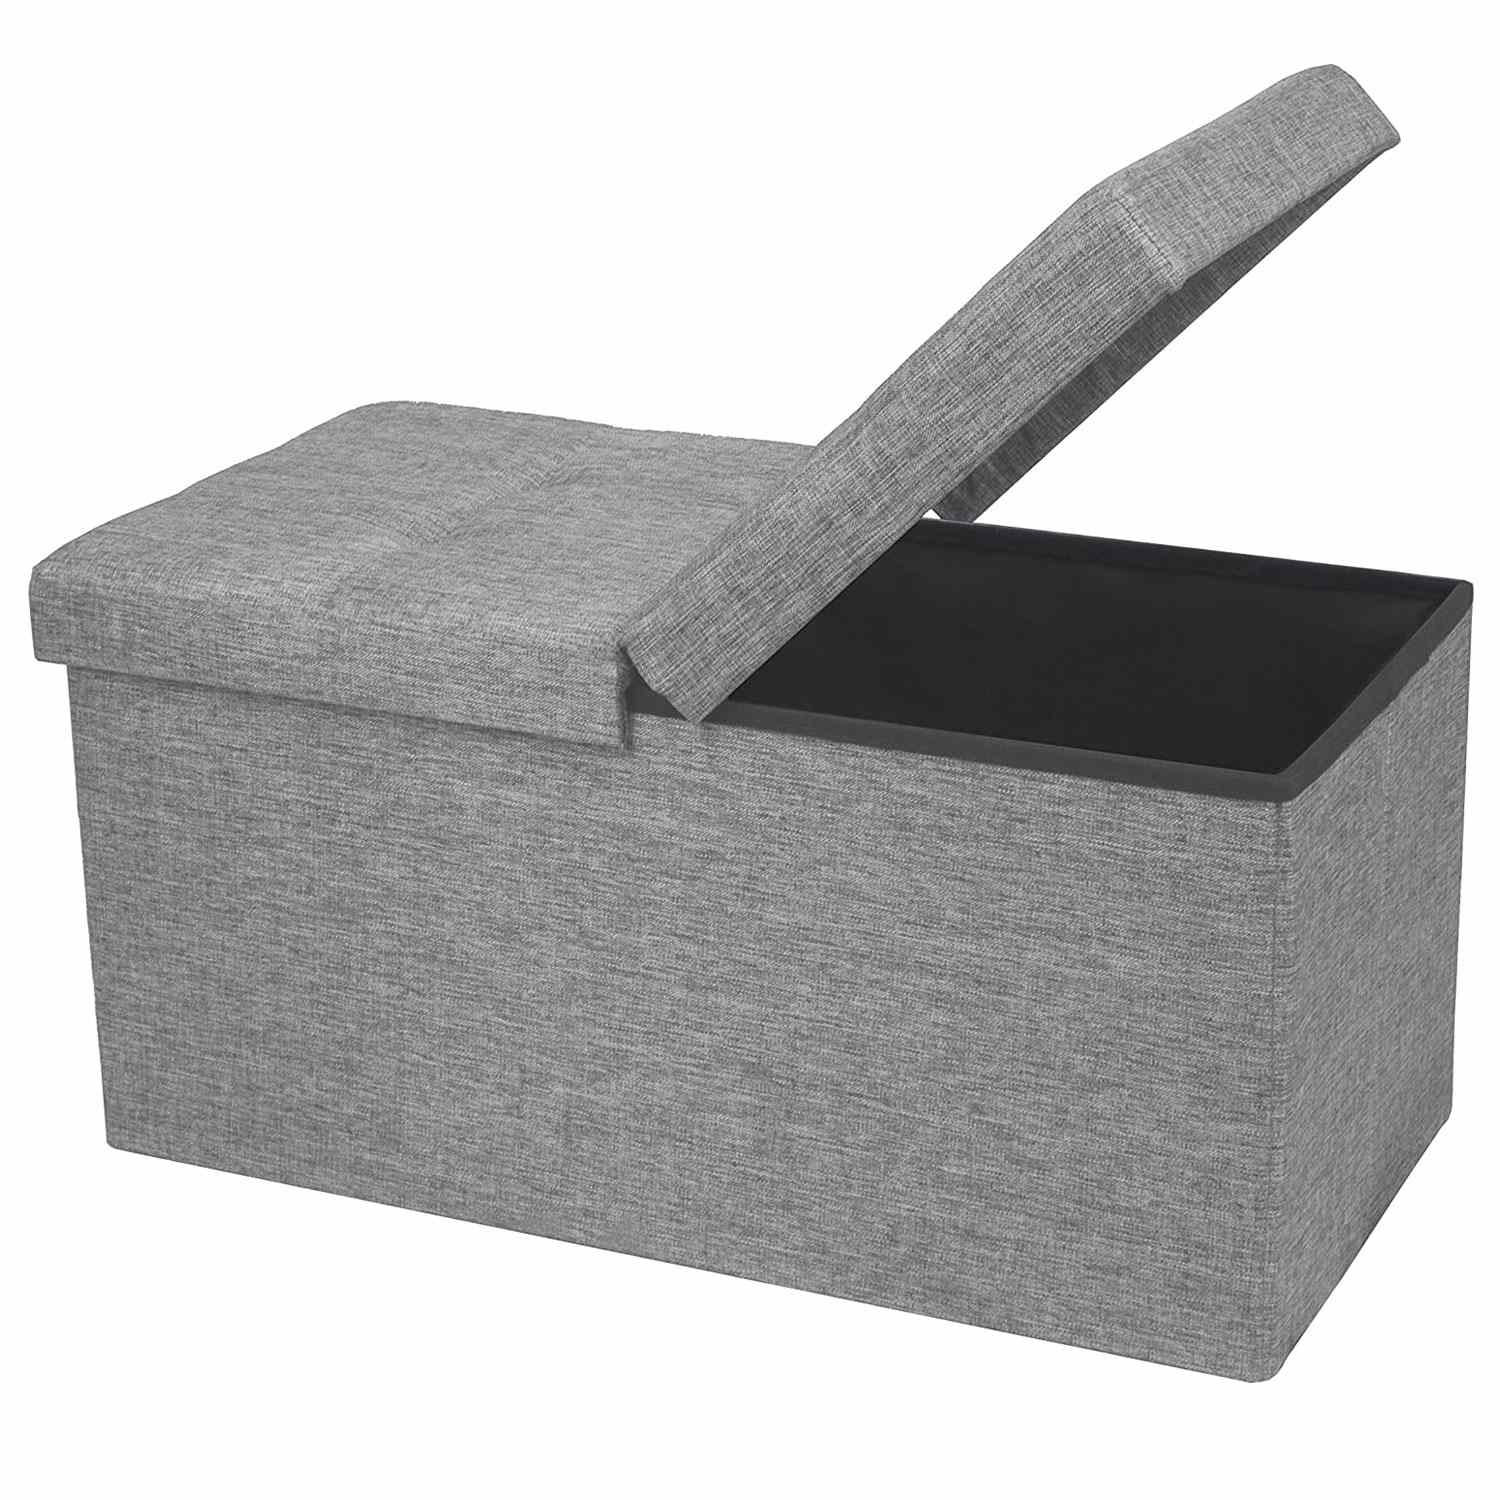 Otto & Ben Folding Toy Box Chest with SMART LIFT Top Linen Fabric Ottomans Bench Foot Rest